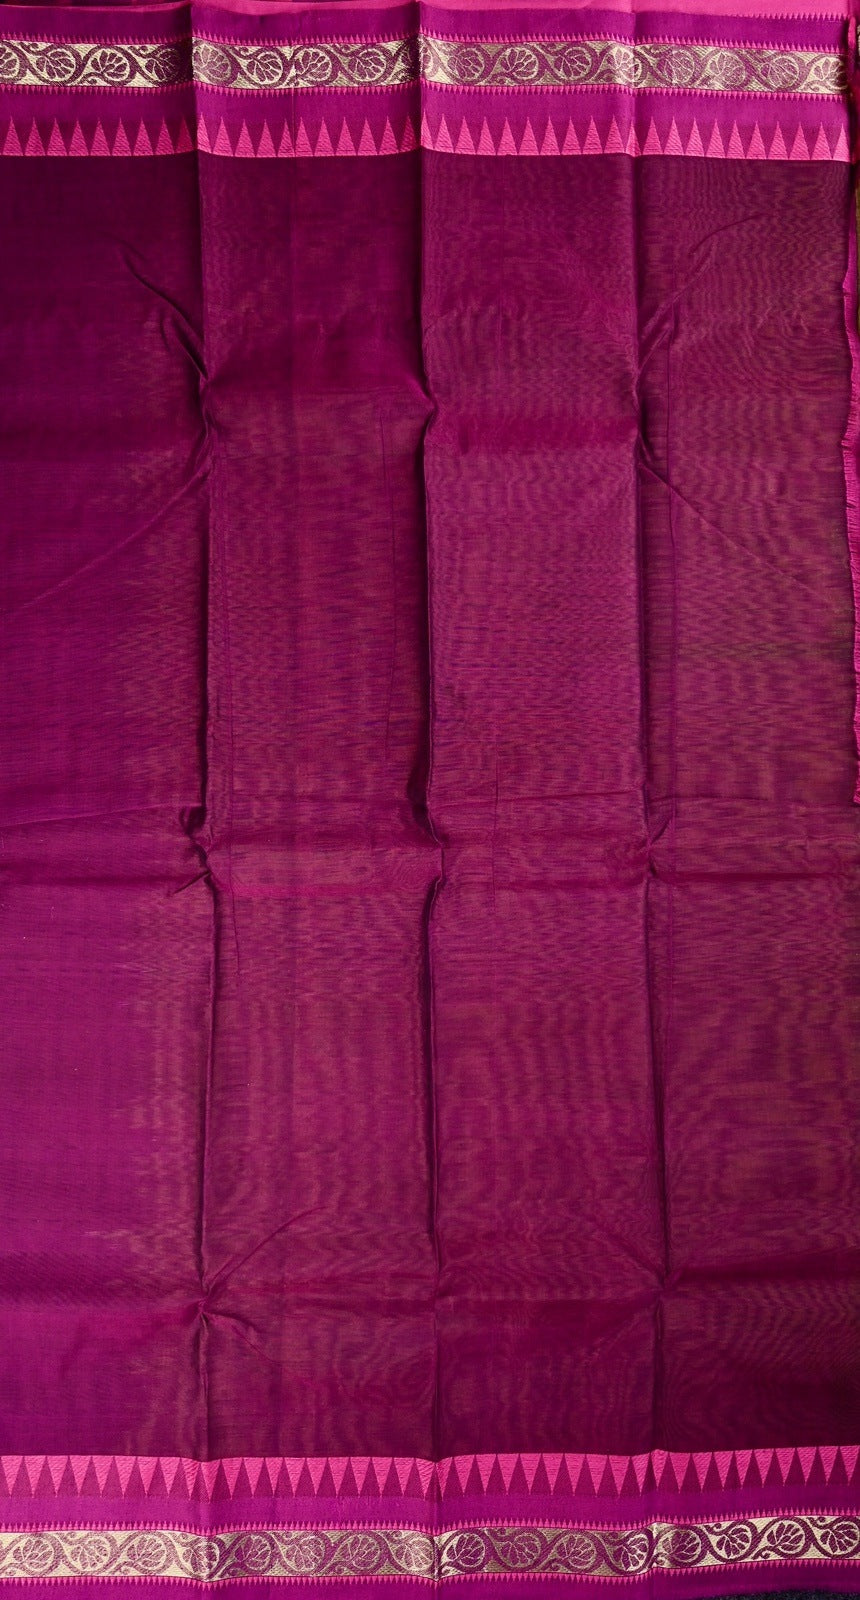 Dhaka cotton saree olive green and pink color with small zari border, big contrast pallu and plain blouse.